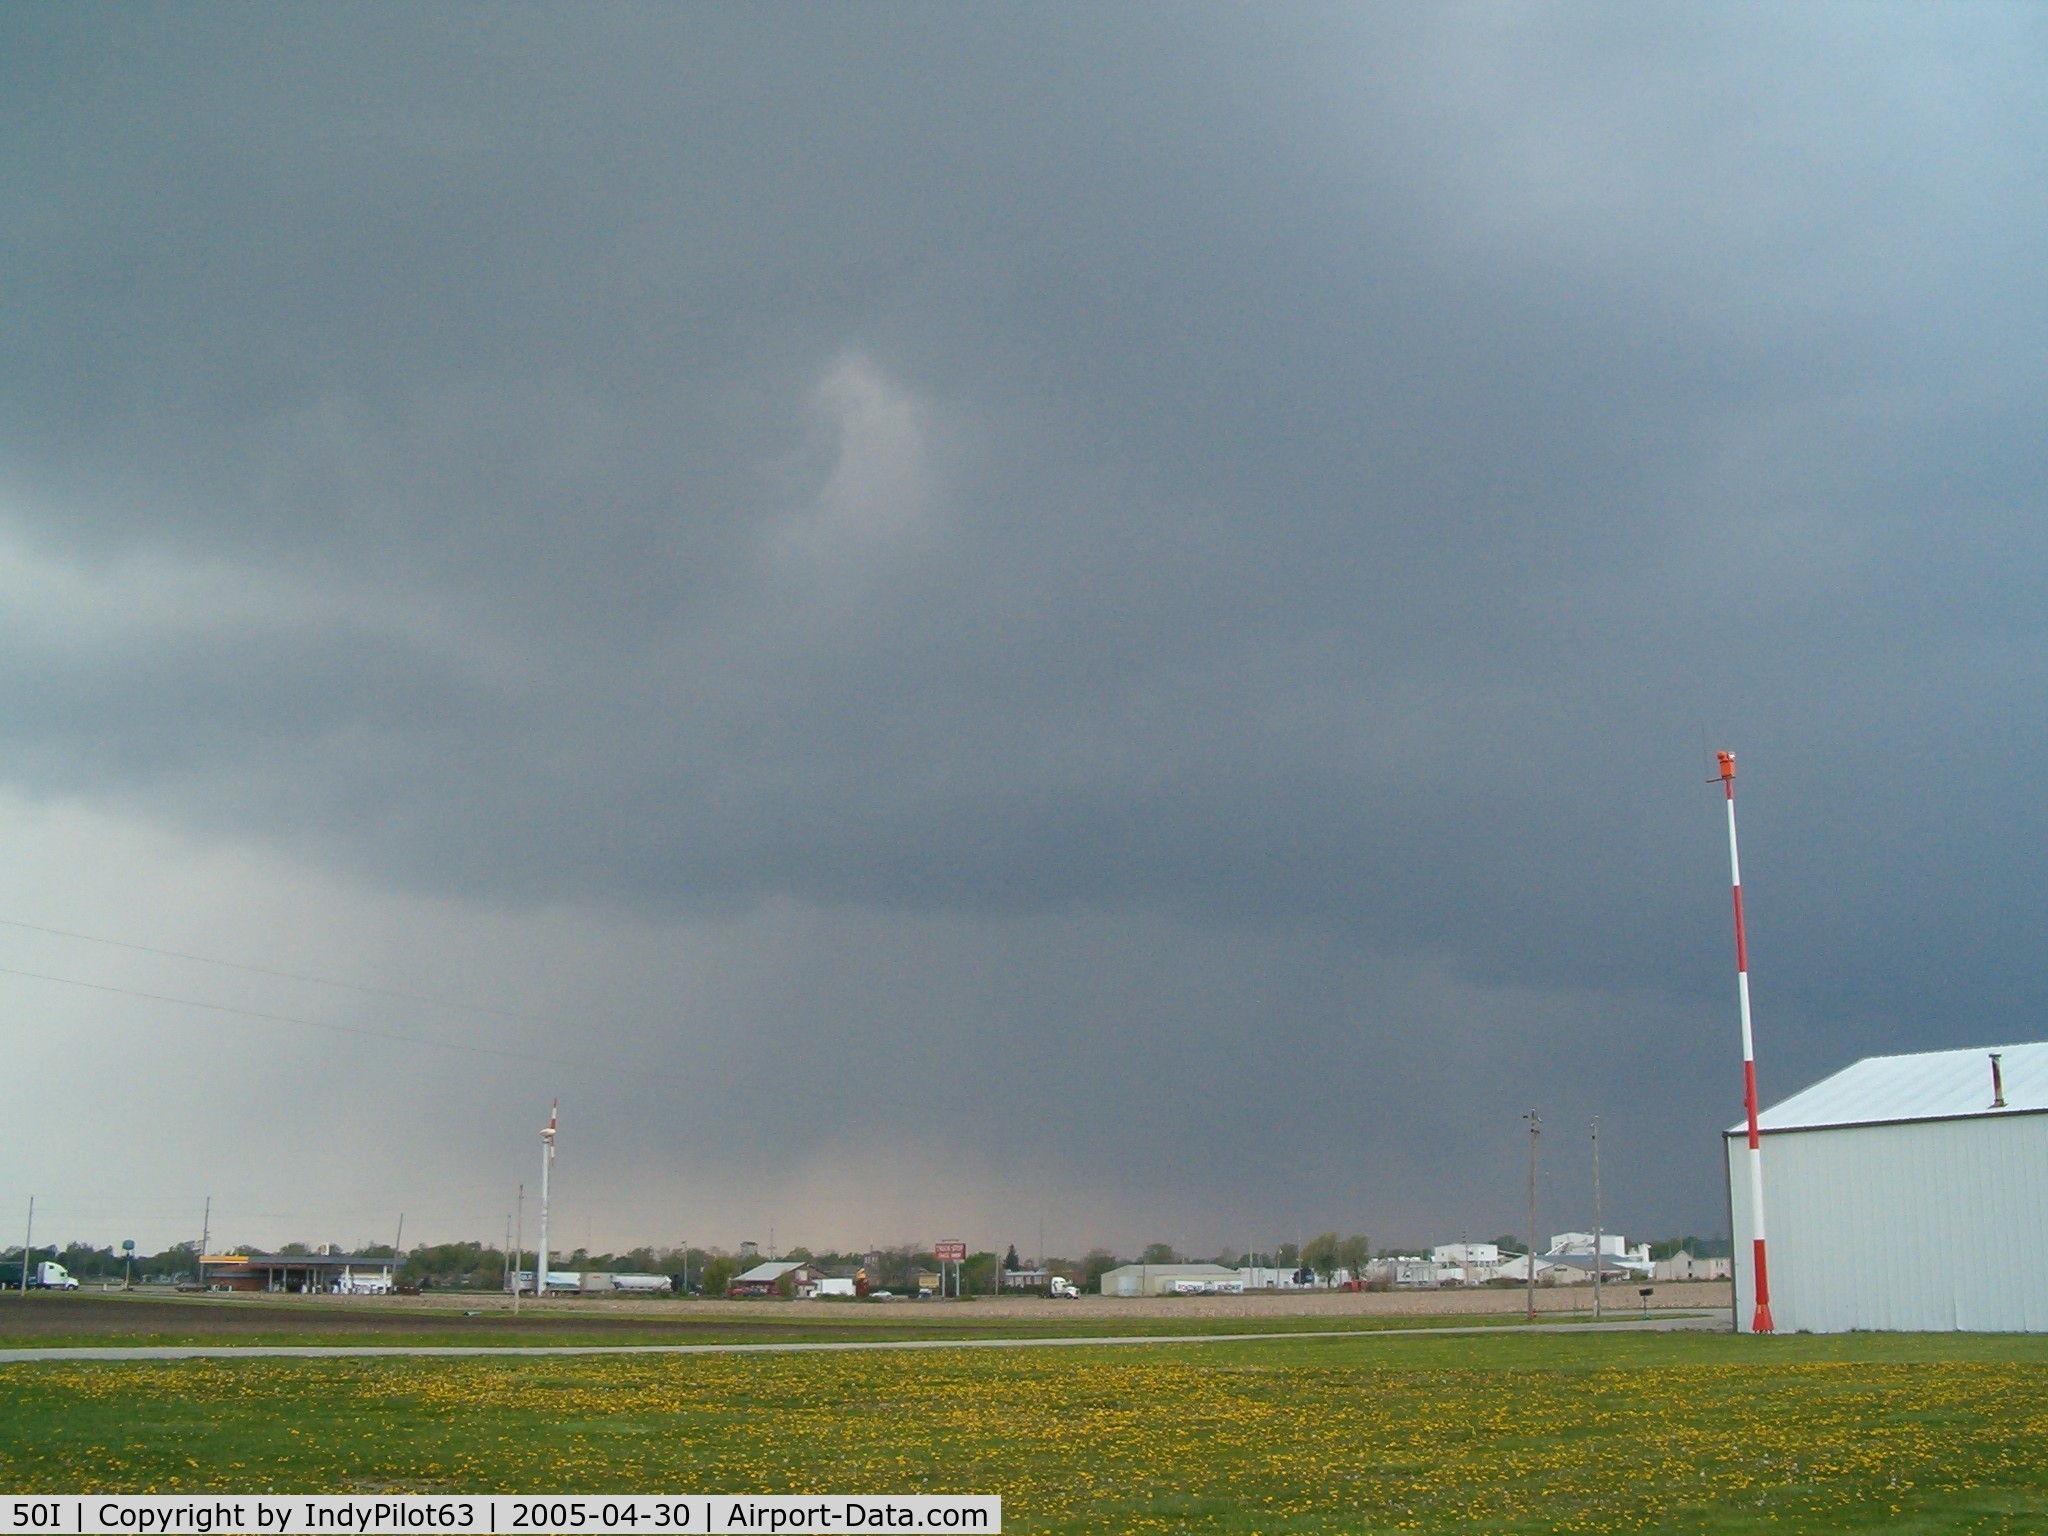 Kentland Municipal Airport (50I) - I just made it to the airport as a spring storm was headed in...